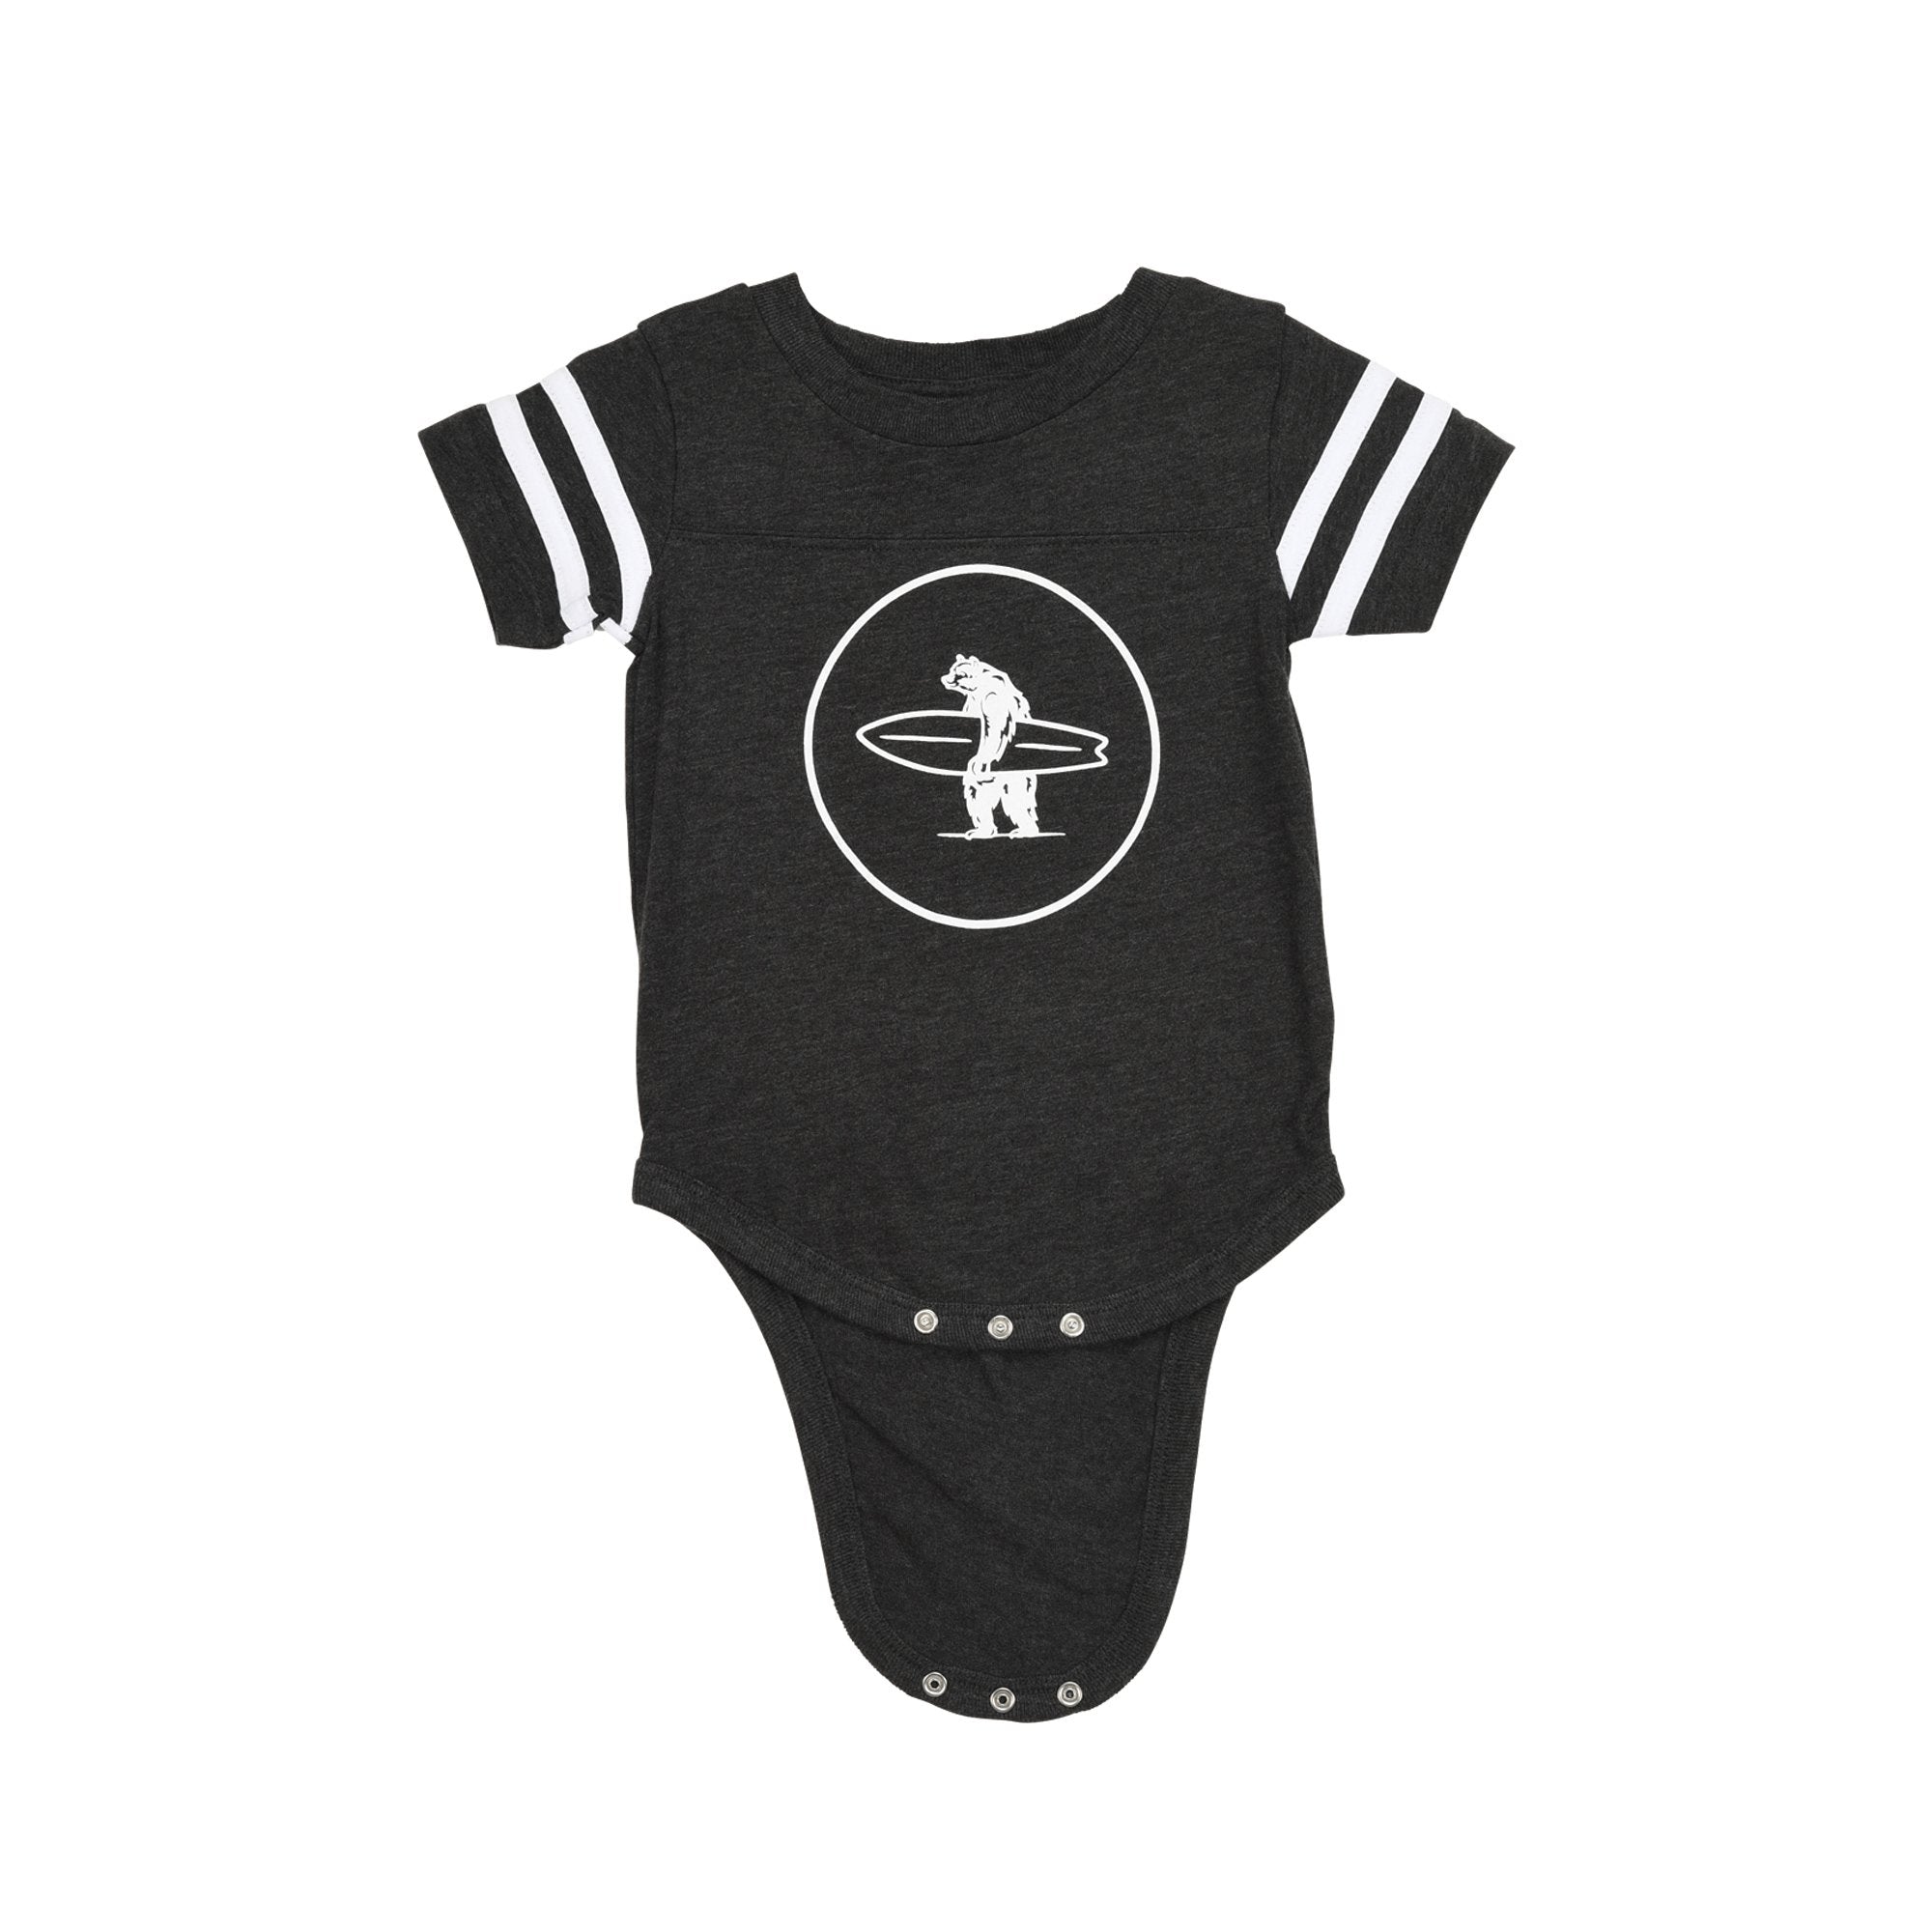 Everyday California Brutus Onesie - Charcoal baby onesie with Brutus logo on the front and Everyday California print on the back.